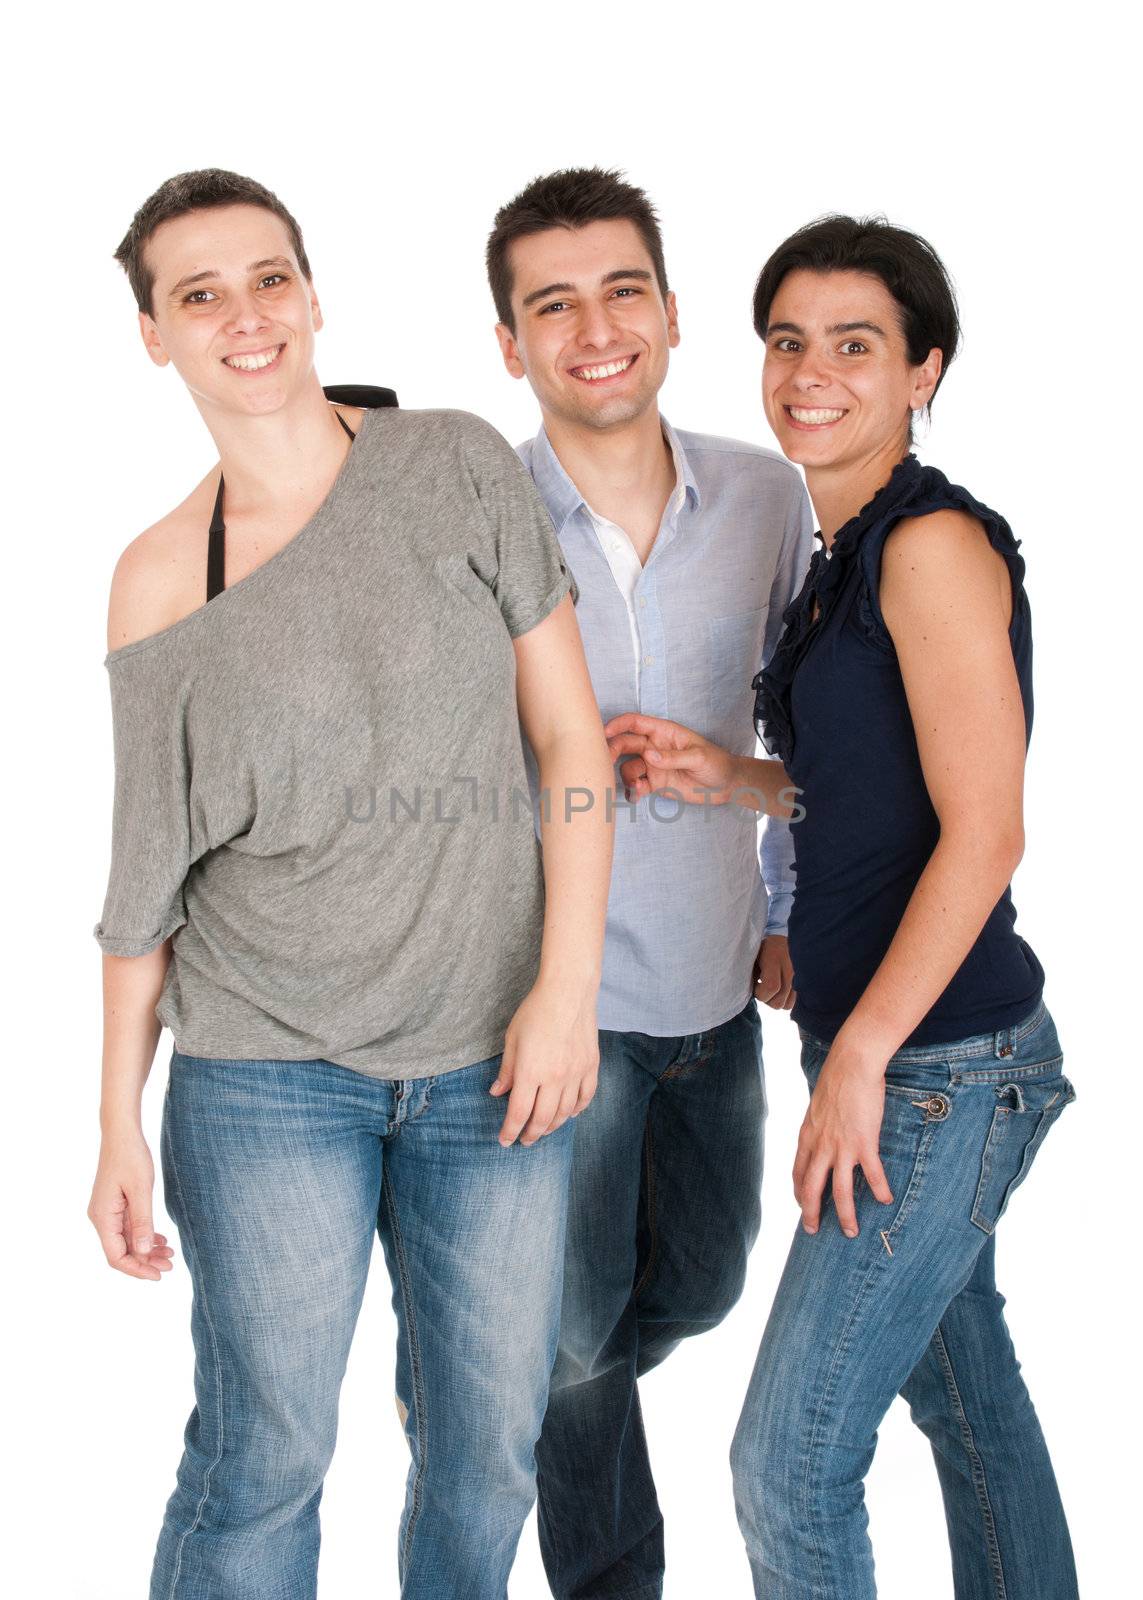 happy smiling brother and his two sisters portrait (isolated on white background)